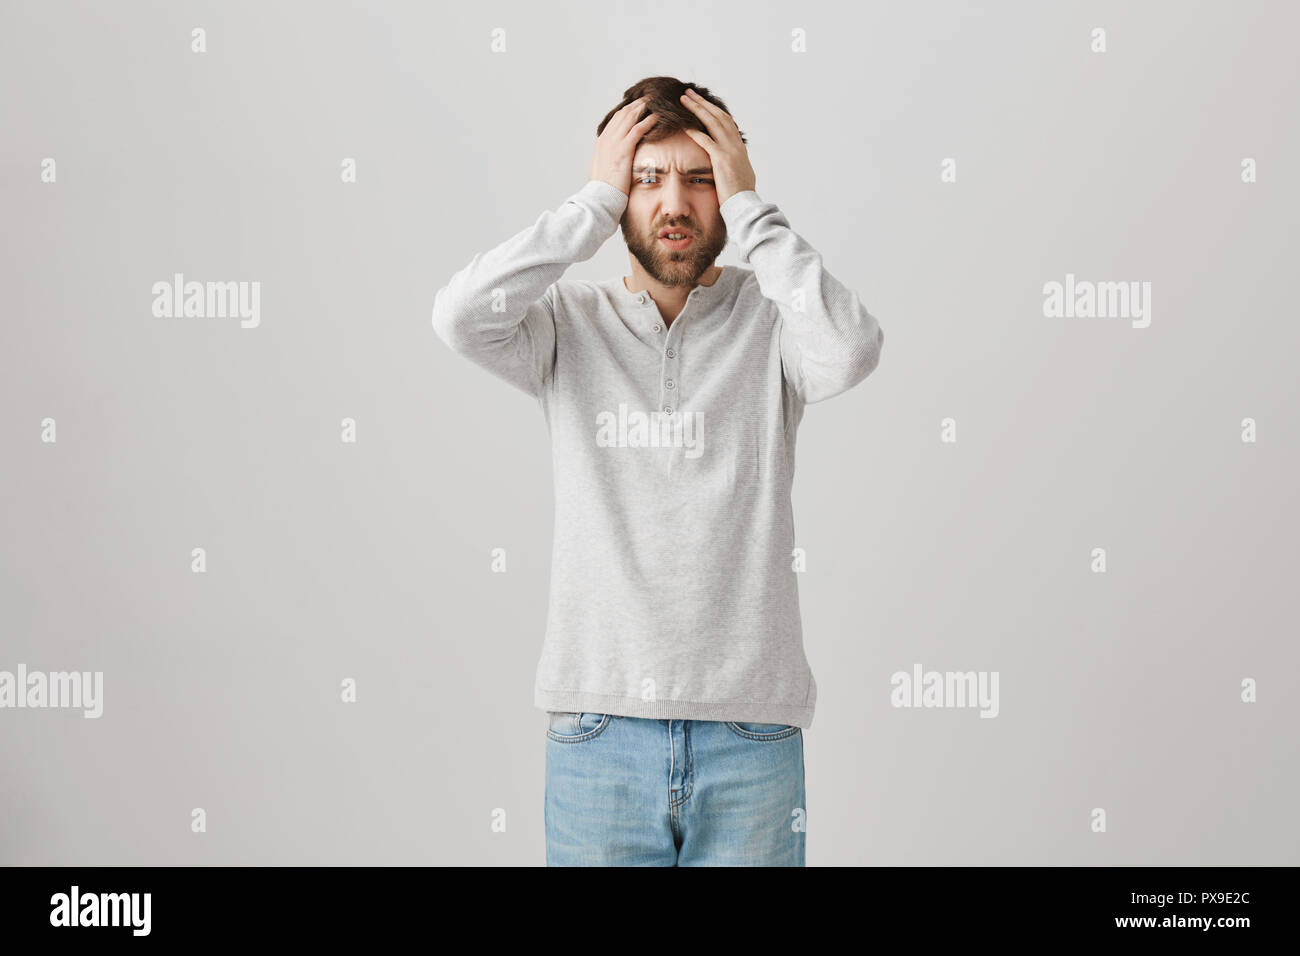 Man got into huge trouble. Studio shot of bothered and upset caucasian man holding head and frowning, losing all his money in casino, being devastated and troubled over gray background Stock Photo